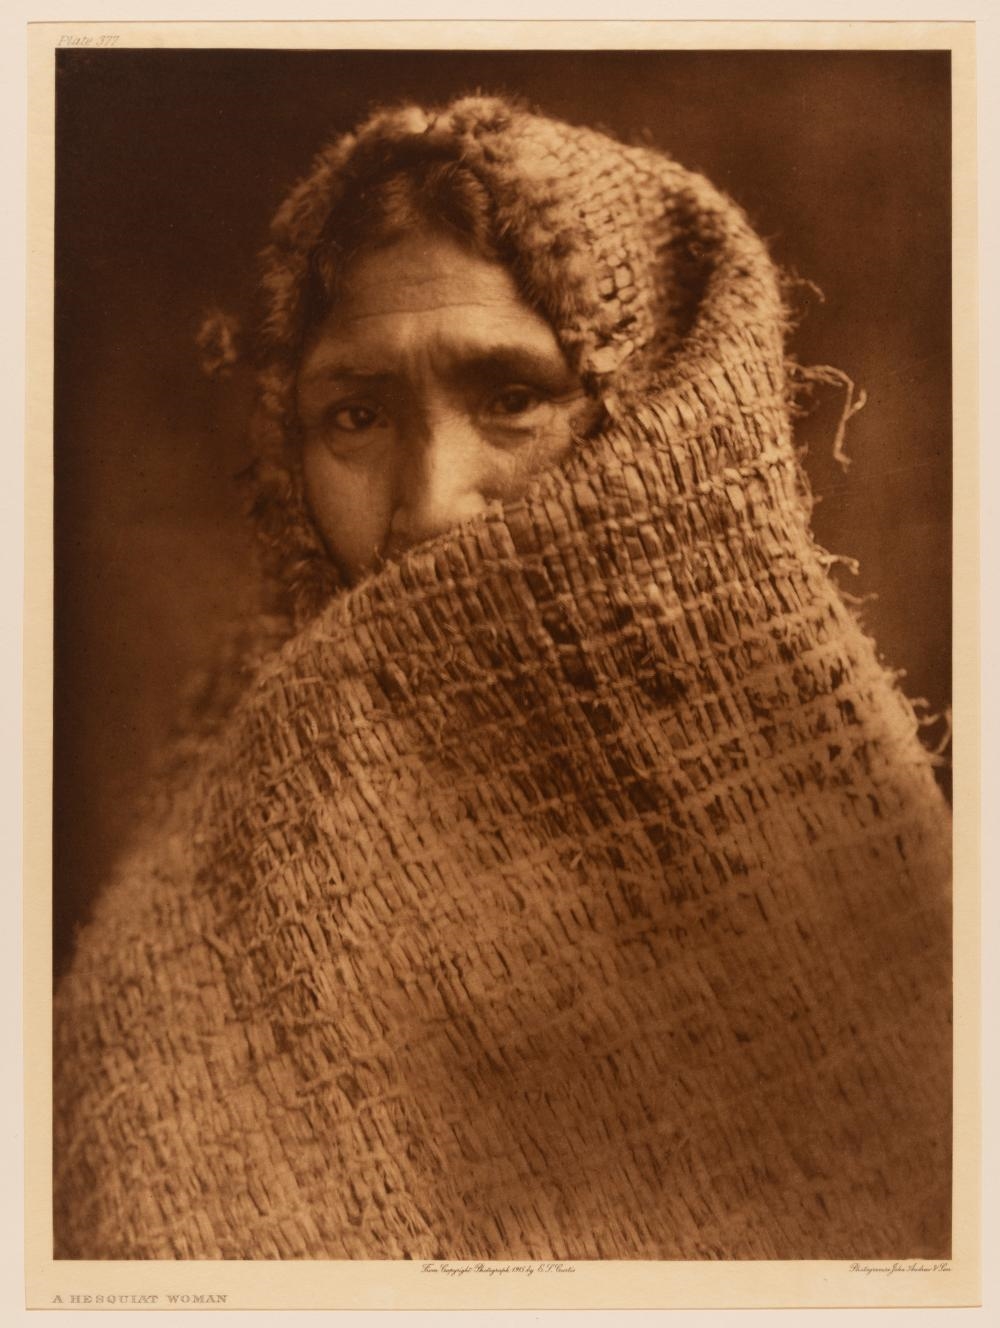 Artwork by Edward S. Curtis, Group of Three Photogravures: Painting a Hat - Nakoaktok, 1914 + A Hesquiat Woman, 1915 + Nootka Woman Wearing Cedar-Bark Blanket, 1915, Made of Photogravures